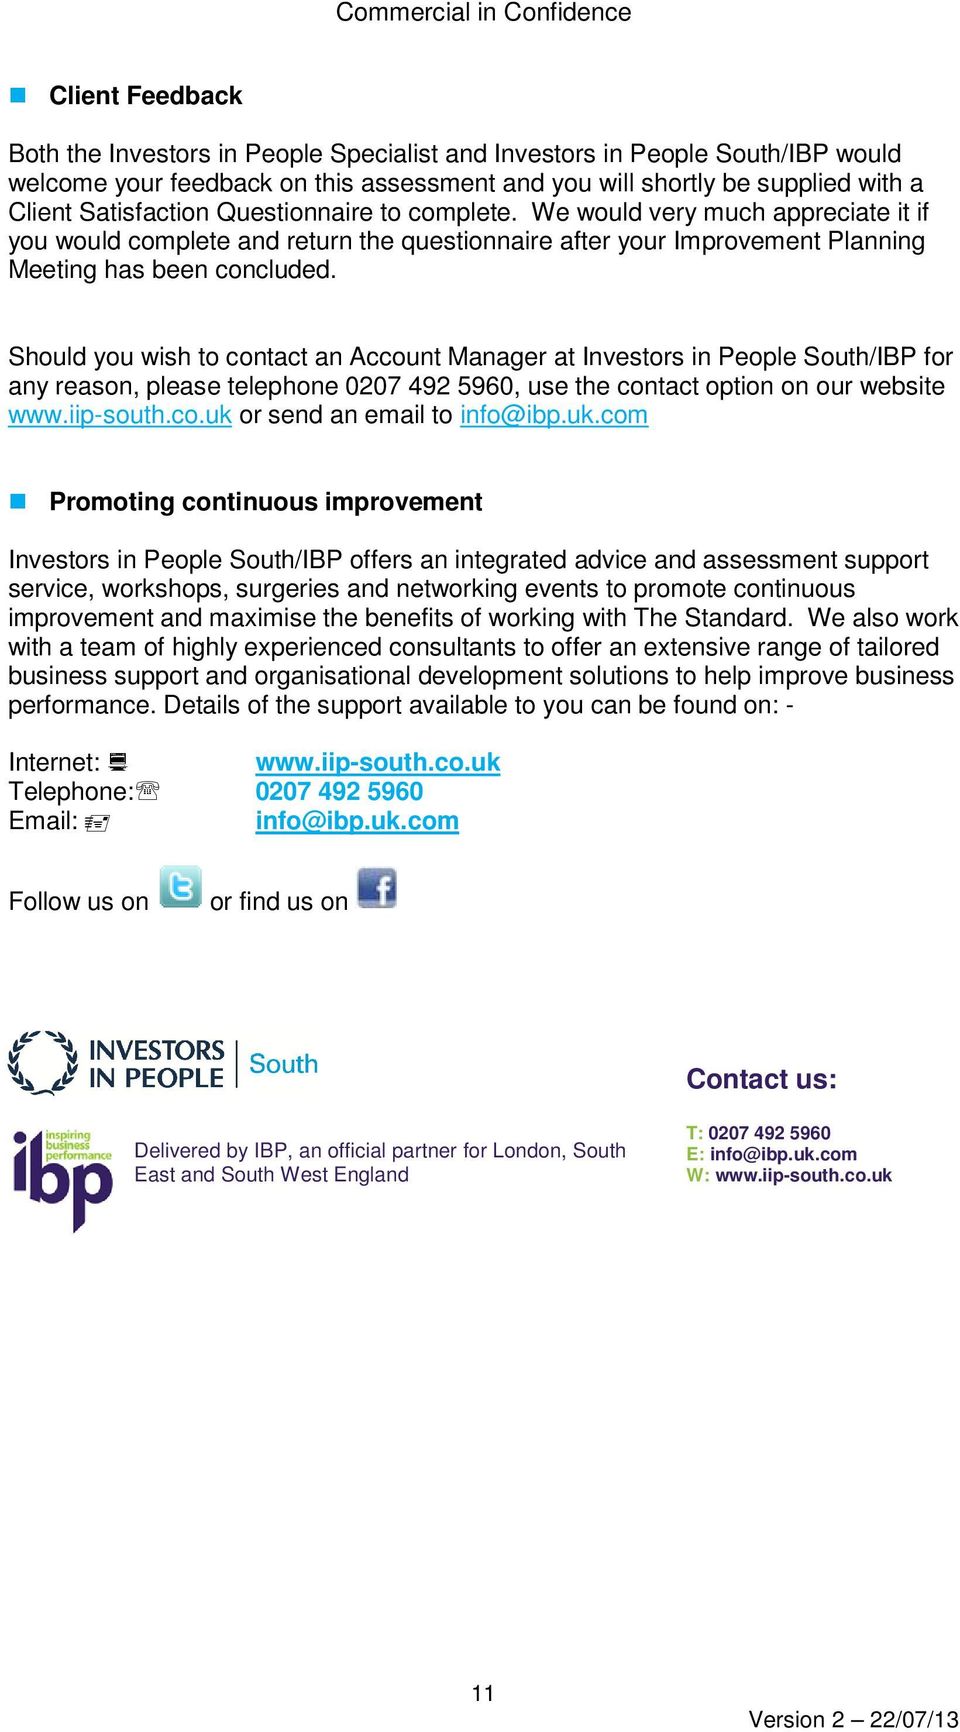 Should you wish to contact an Account Manager at Investors in People South/IBP for any reason, please telephone 0207 492 5960, use the contact option on our website www.iip-south.co.uk or send an email to info@ibp.